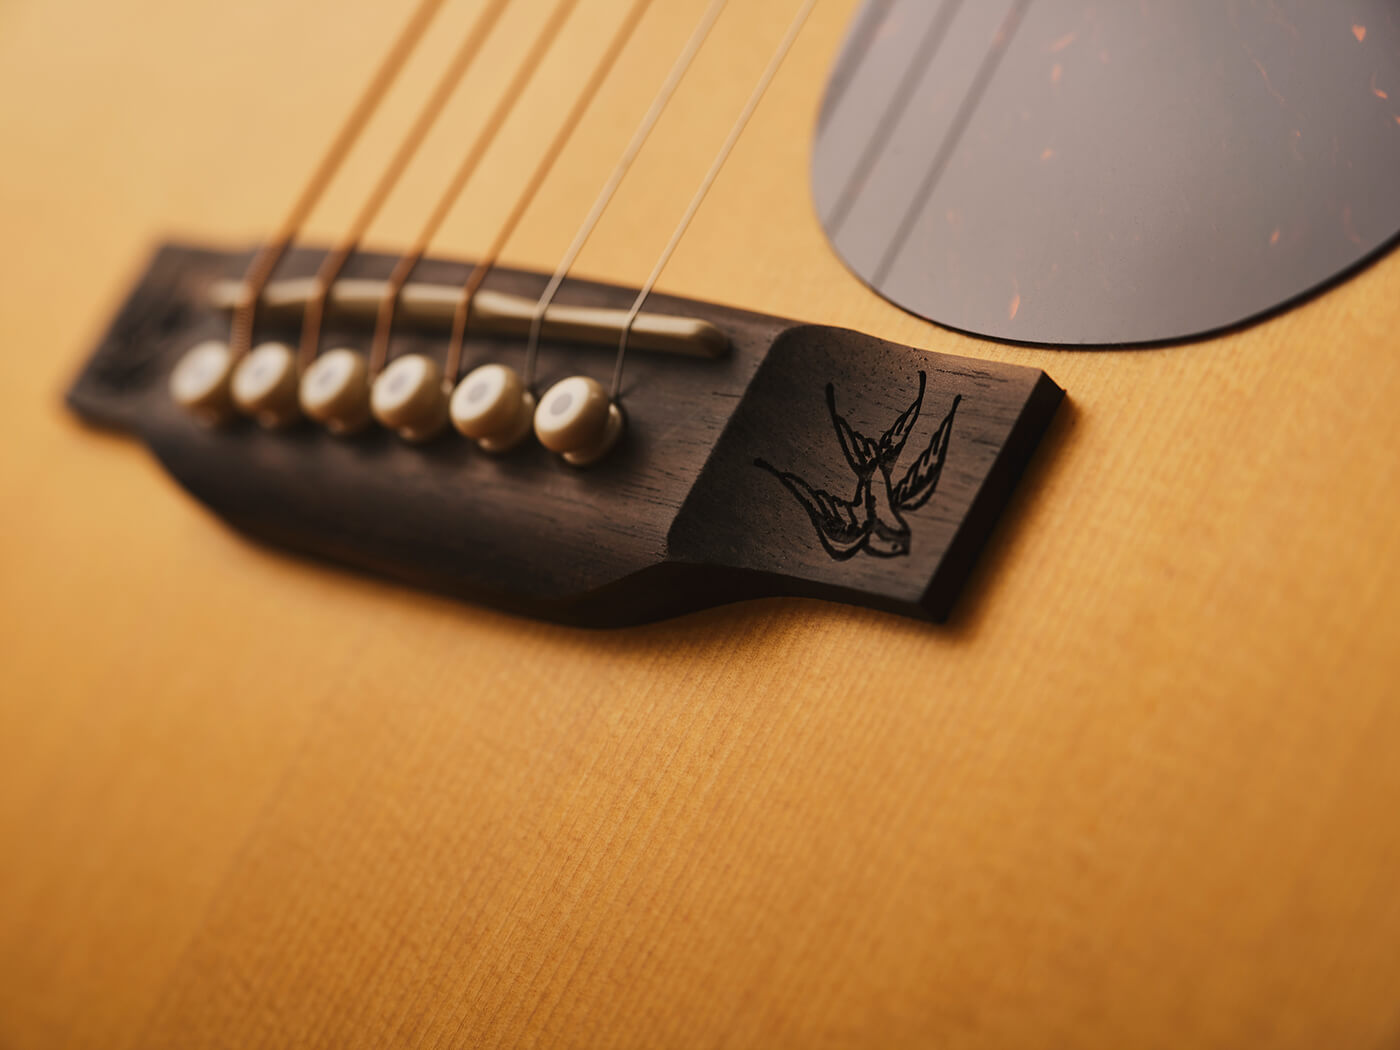 Laser-etched swallows on Shawn Mendes’ signature Martin Guitar, the 000JR-10E Shawn Mendes, photo by Adam Gasson